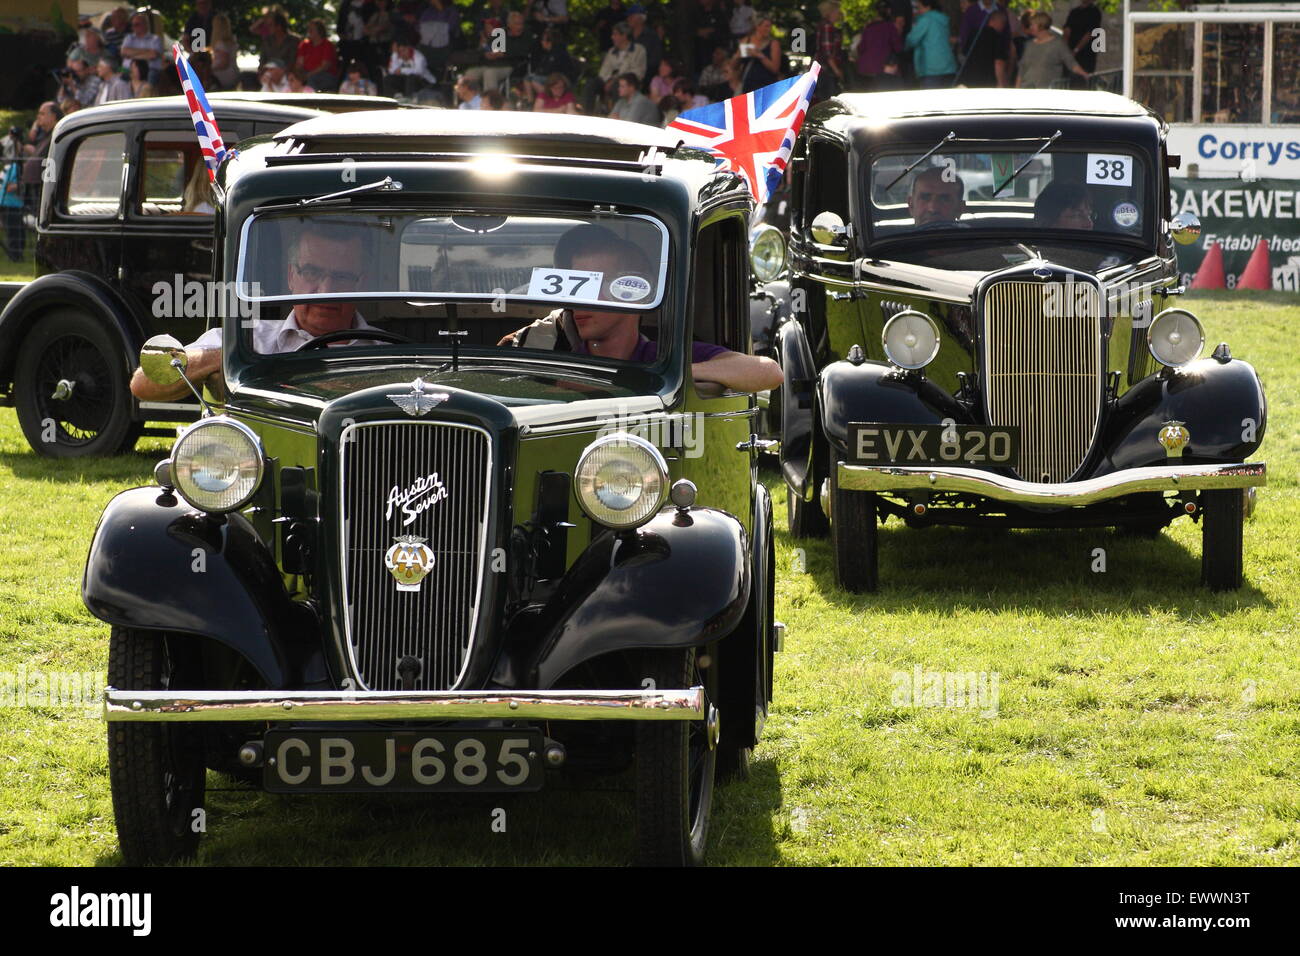 The vintage car parade gets underway at Chatsworth Country Fair, PEak District Derbyshire England uk Stock Photo